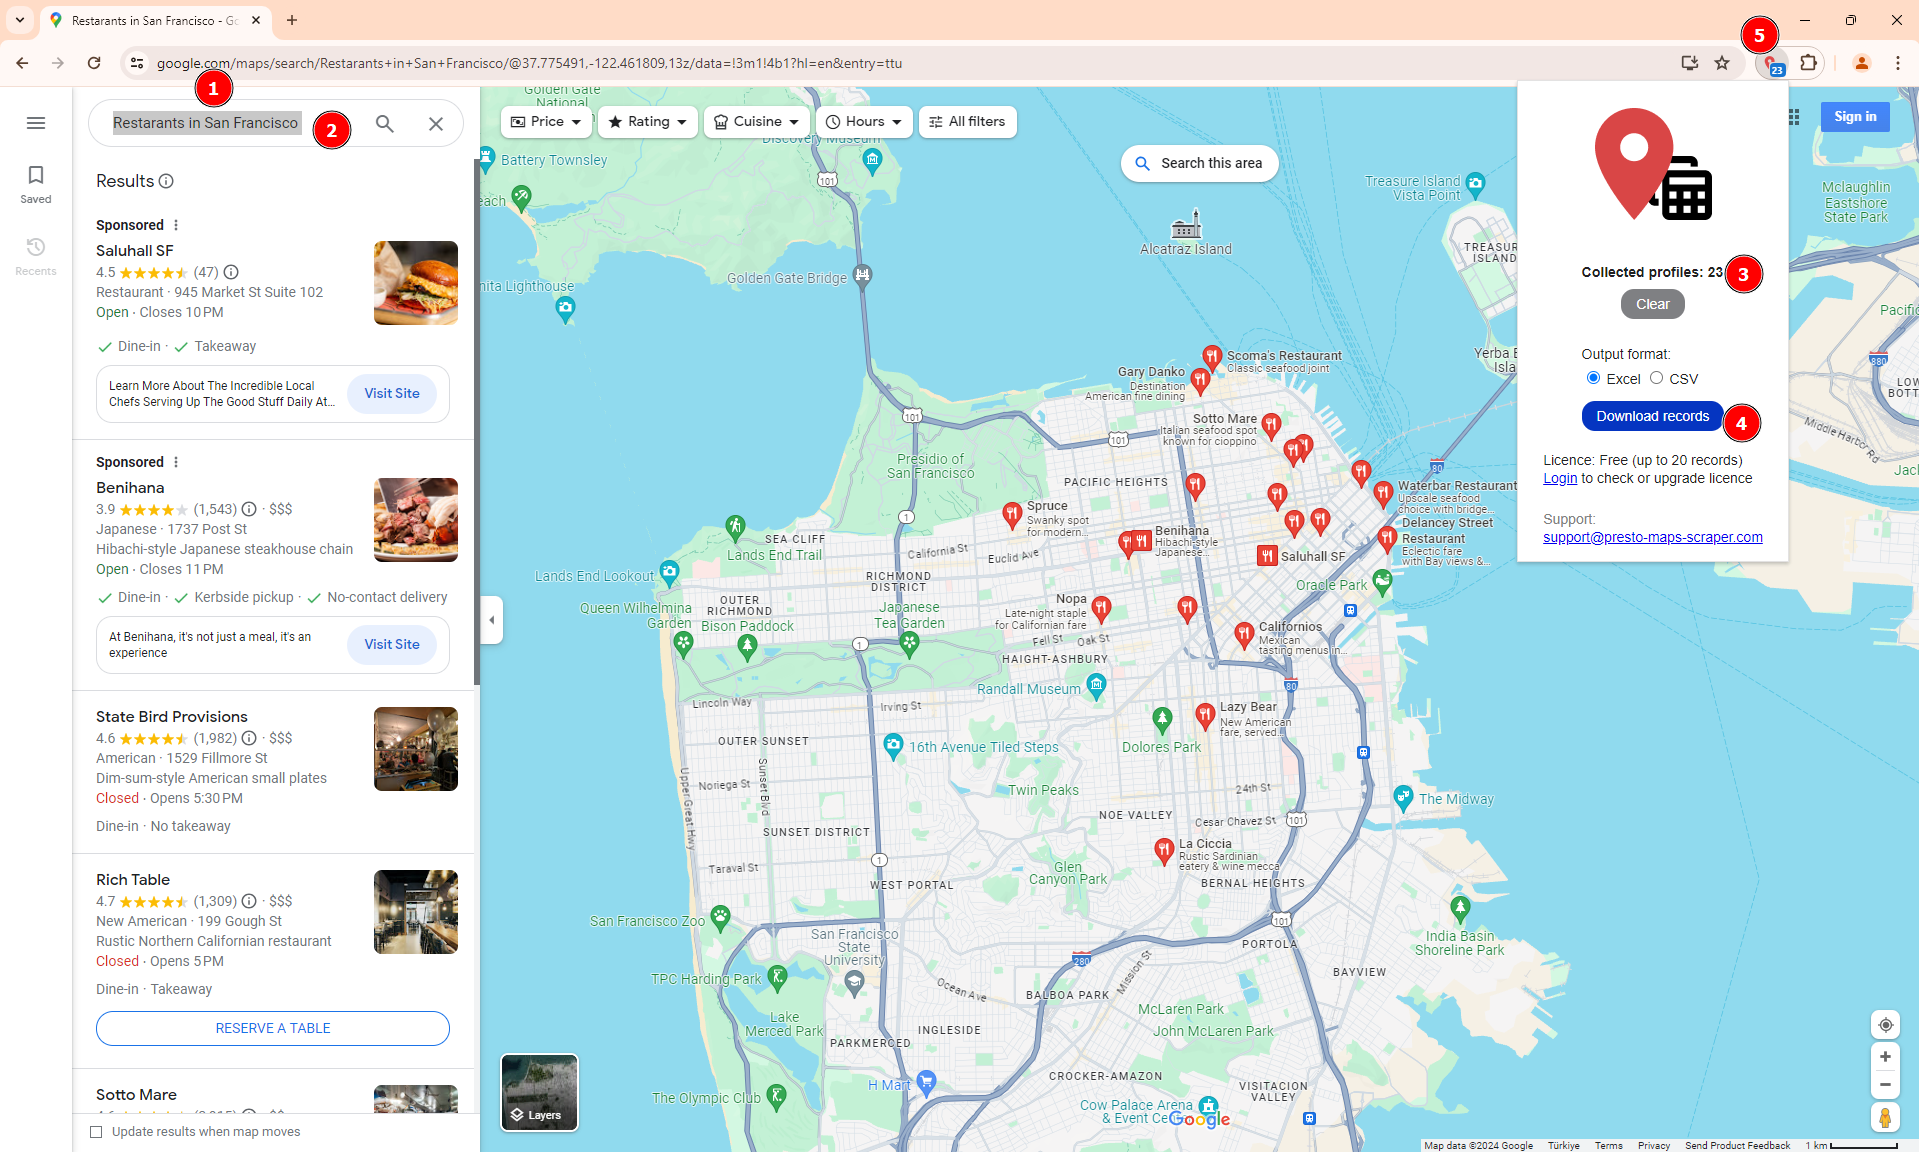 Scraping Business Profiles on Google Maps